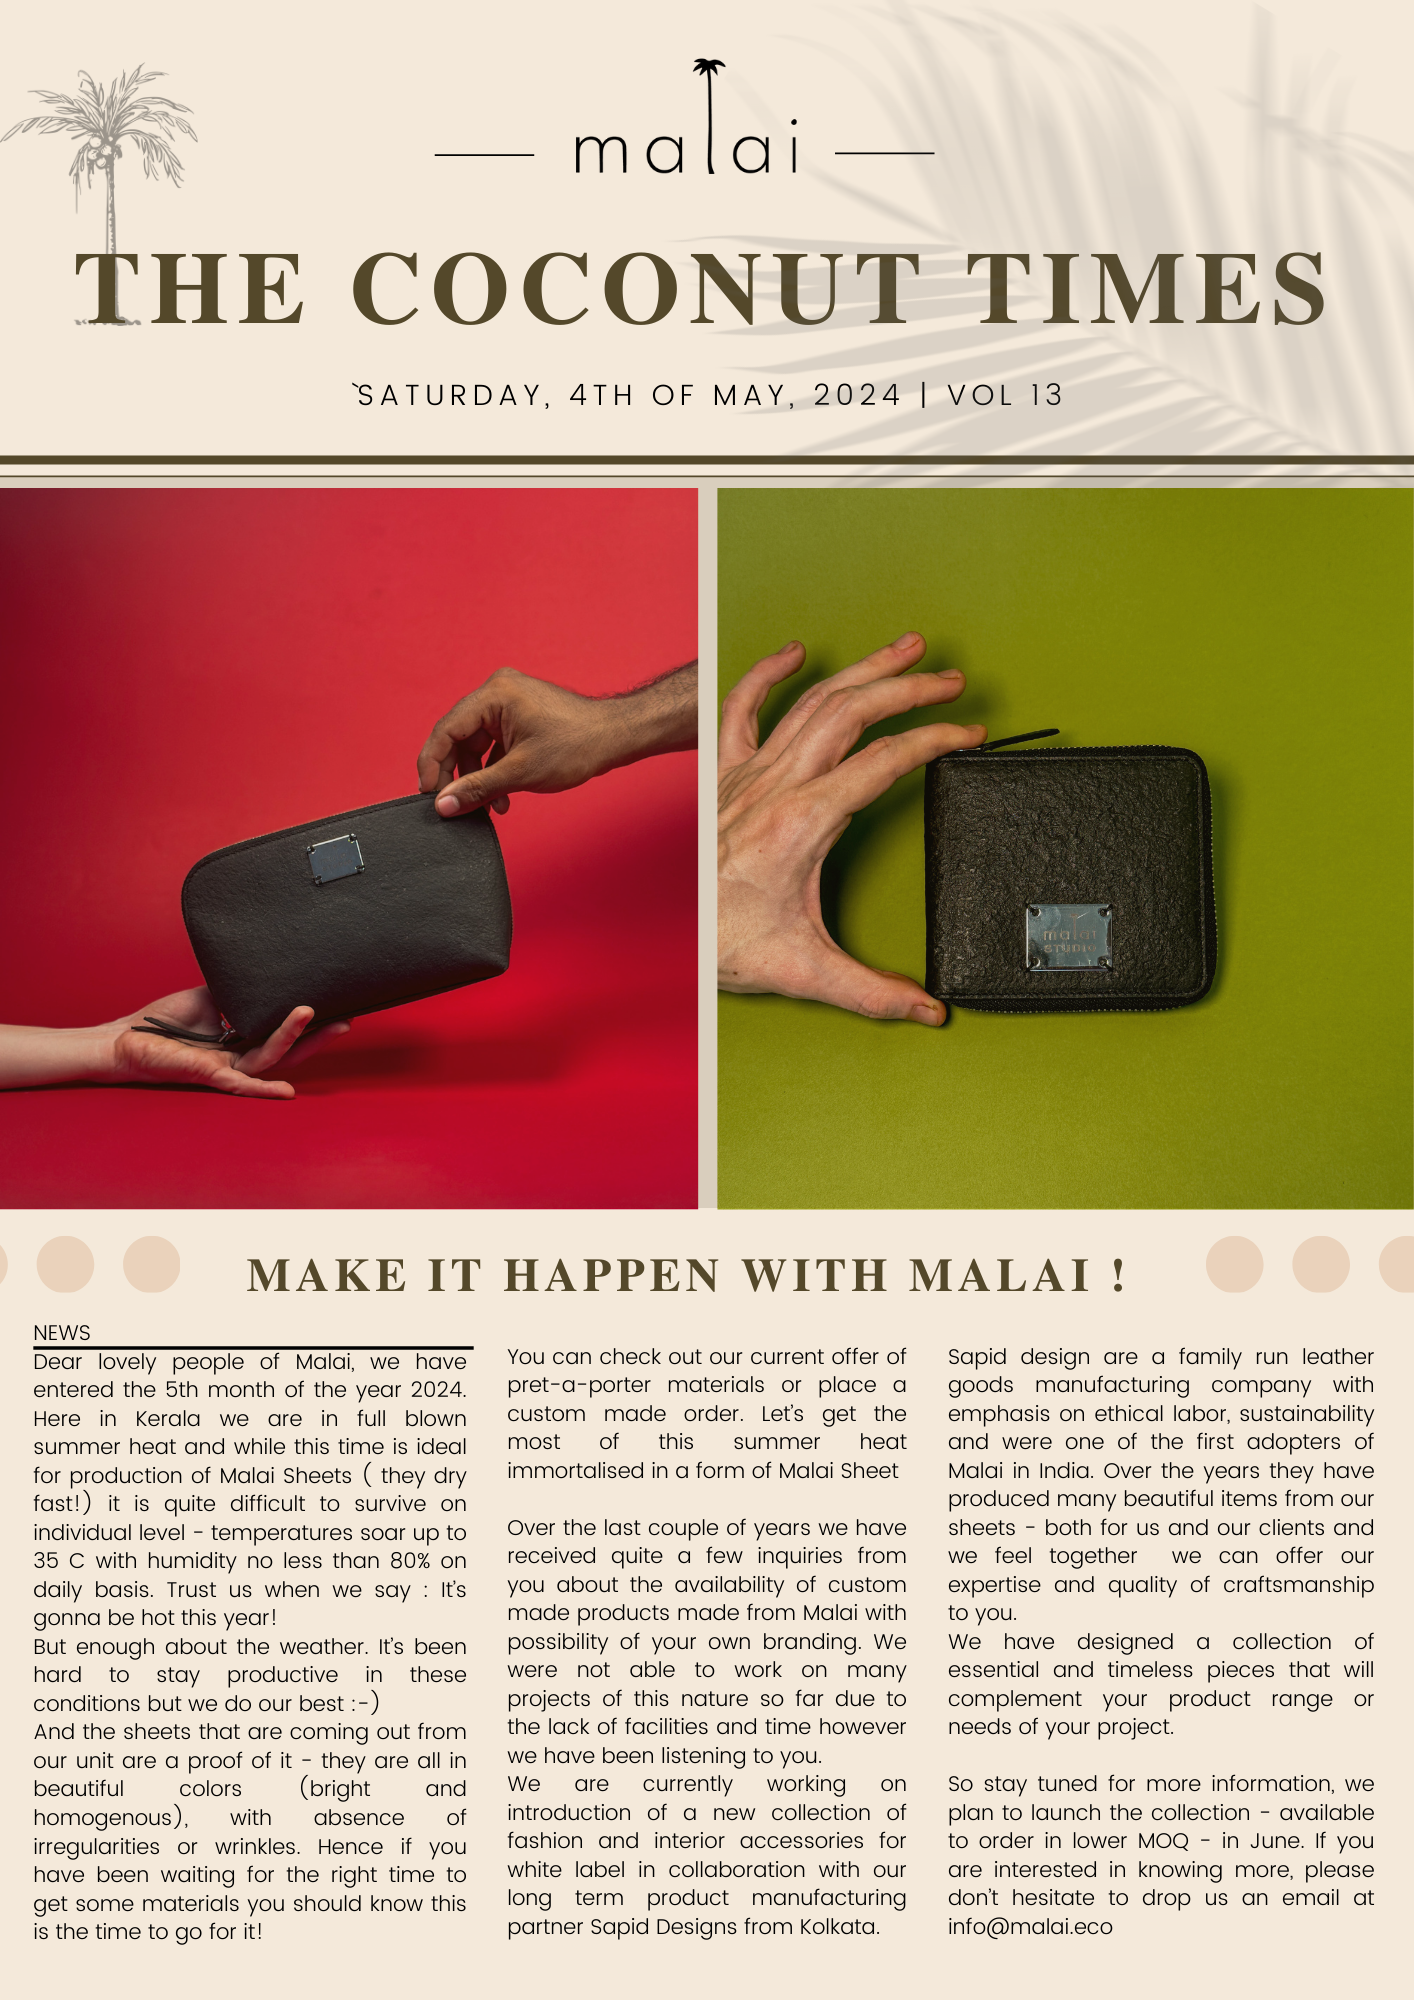 The Coconut Times vol 13